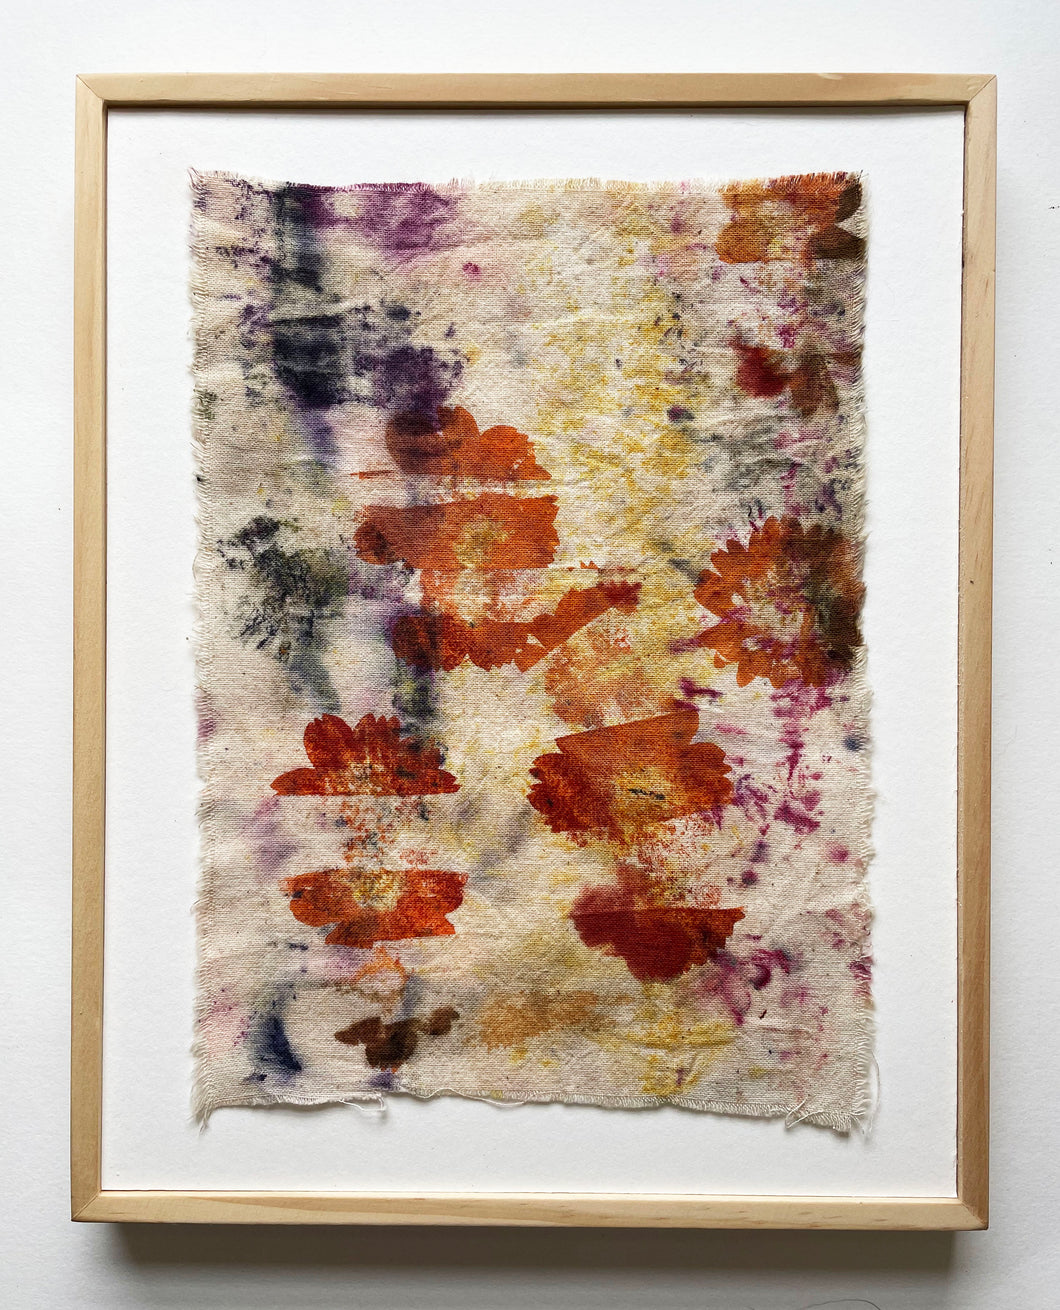 severed - naturally dyed textile